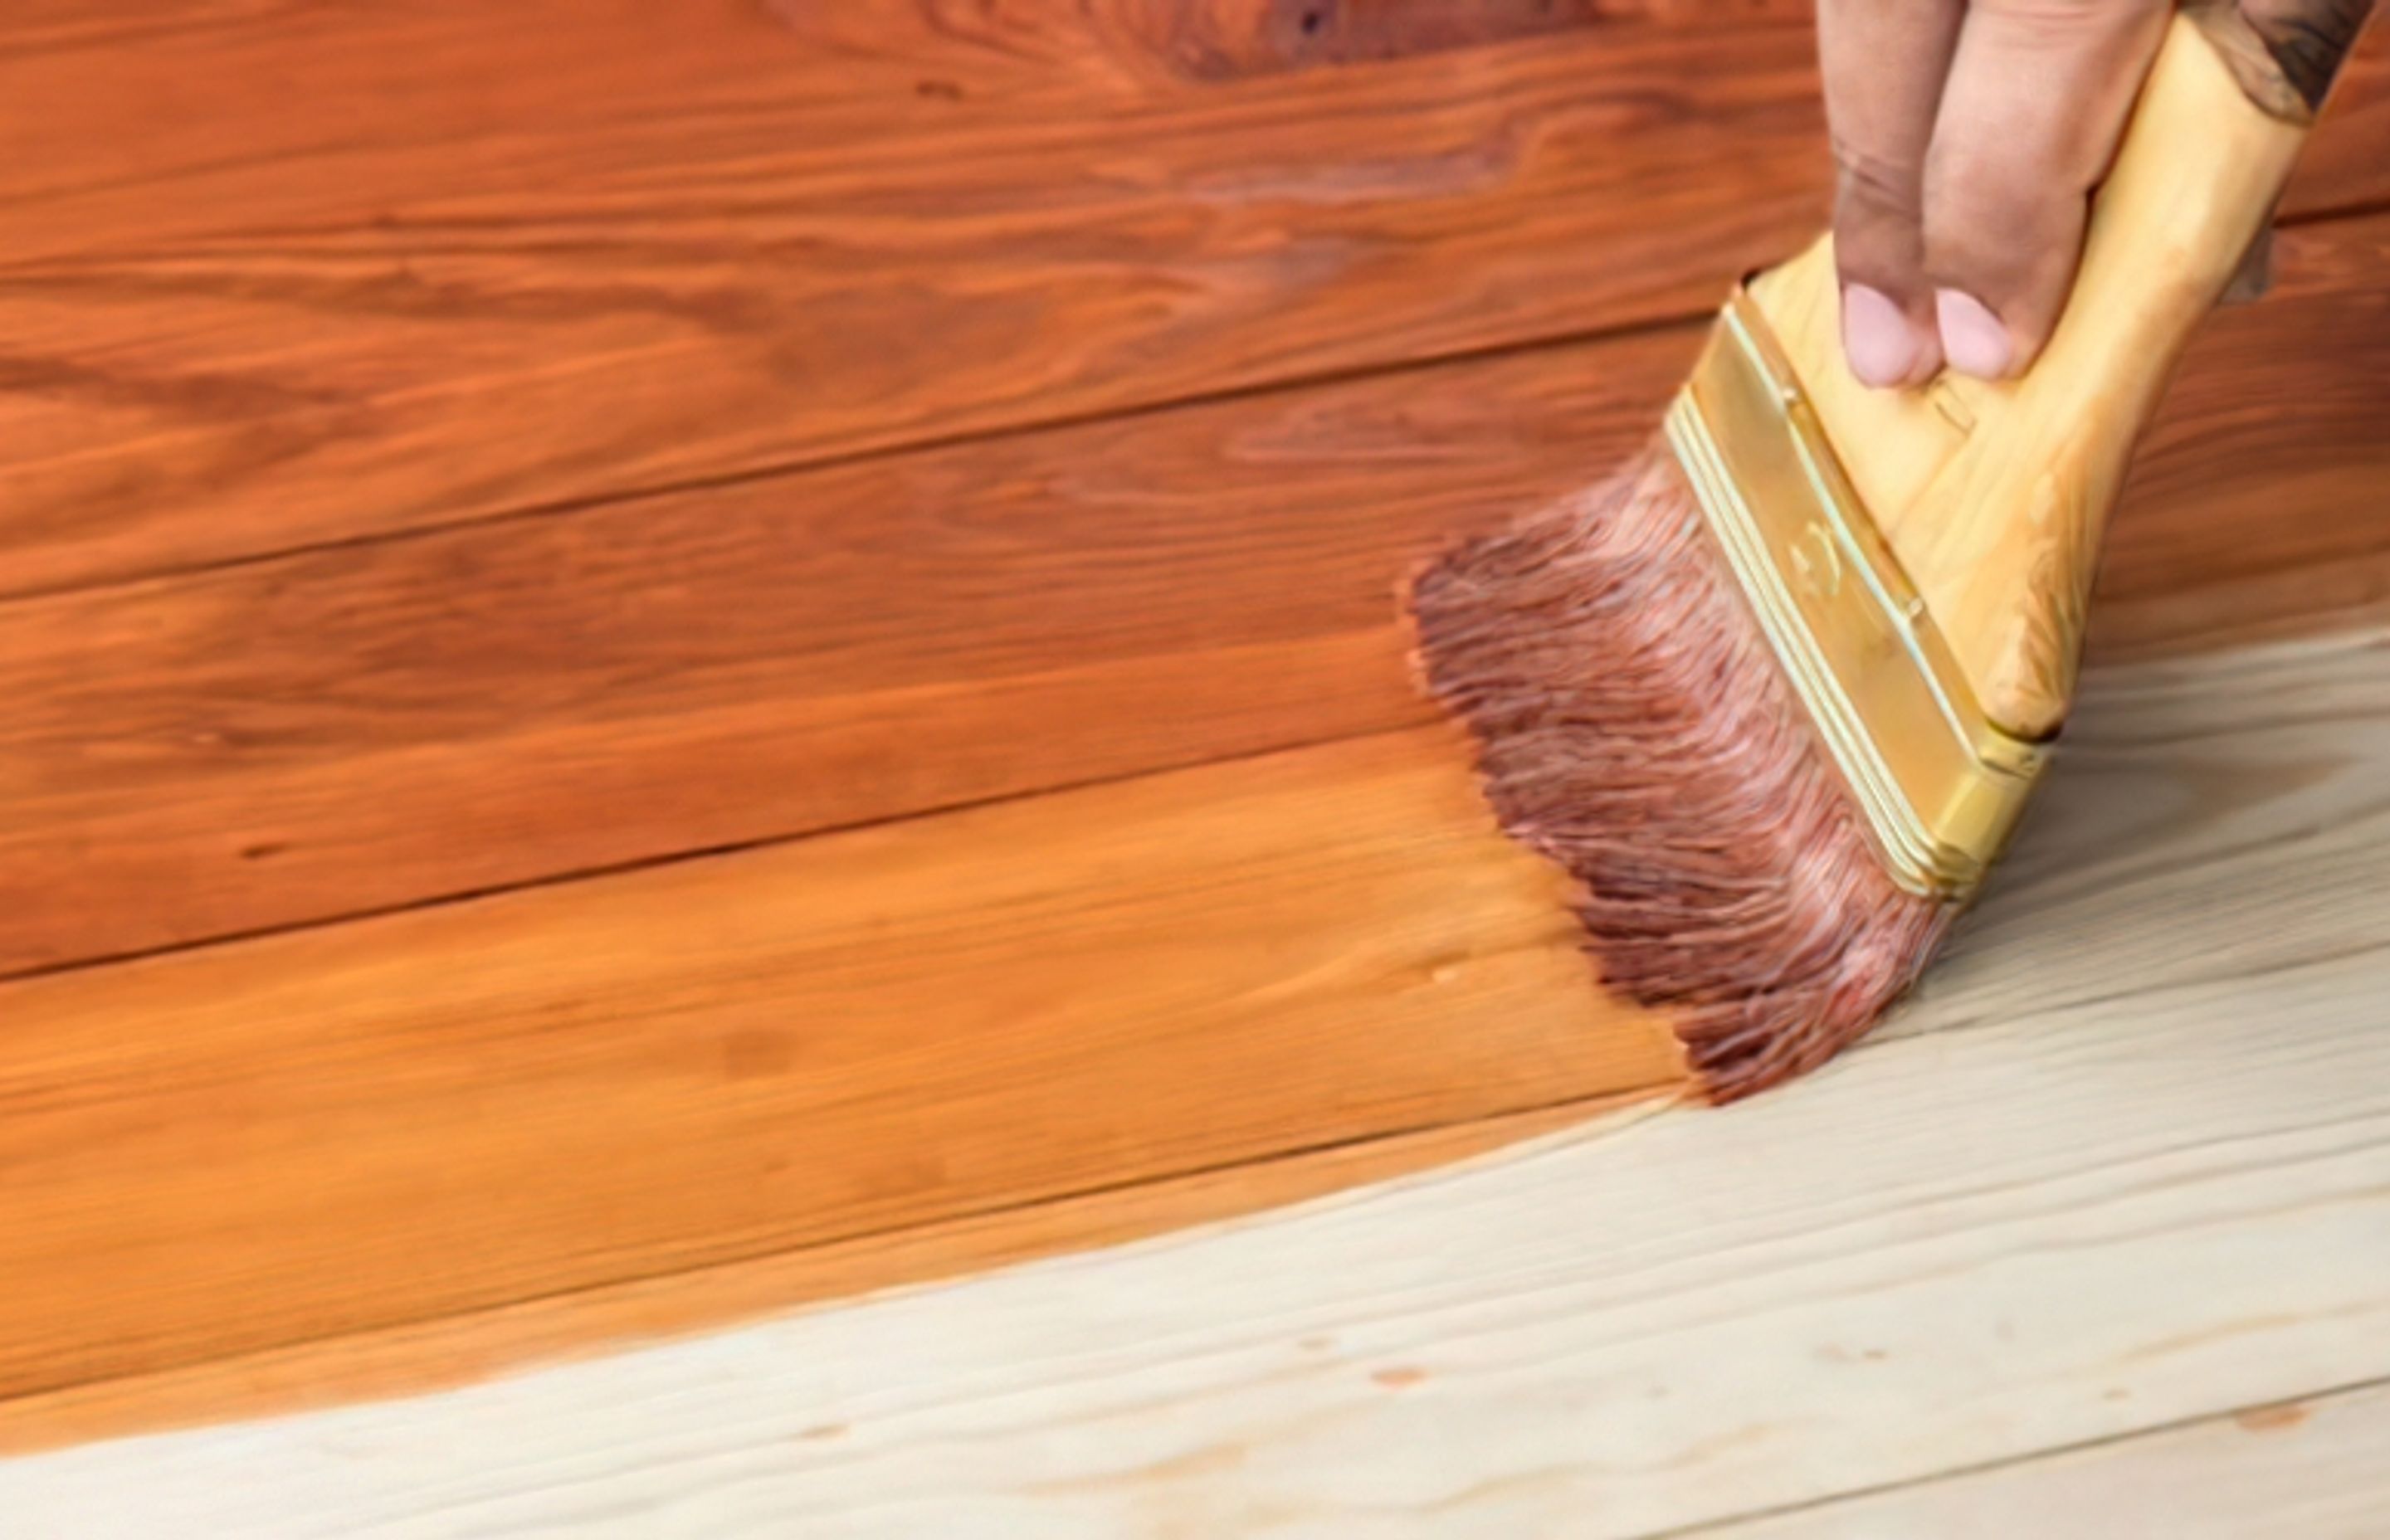 Should I use lacquer or hardwax oil to protect my timber wall cladding?